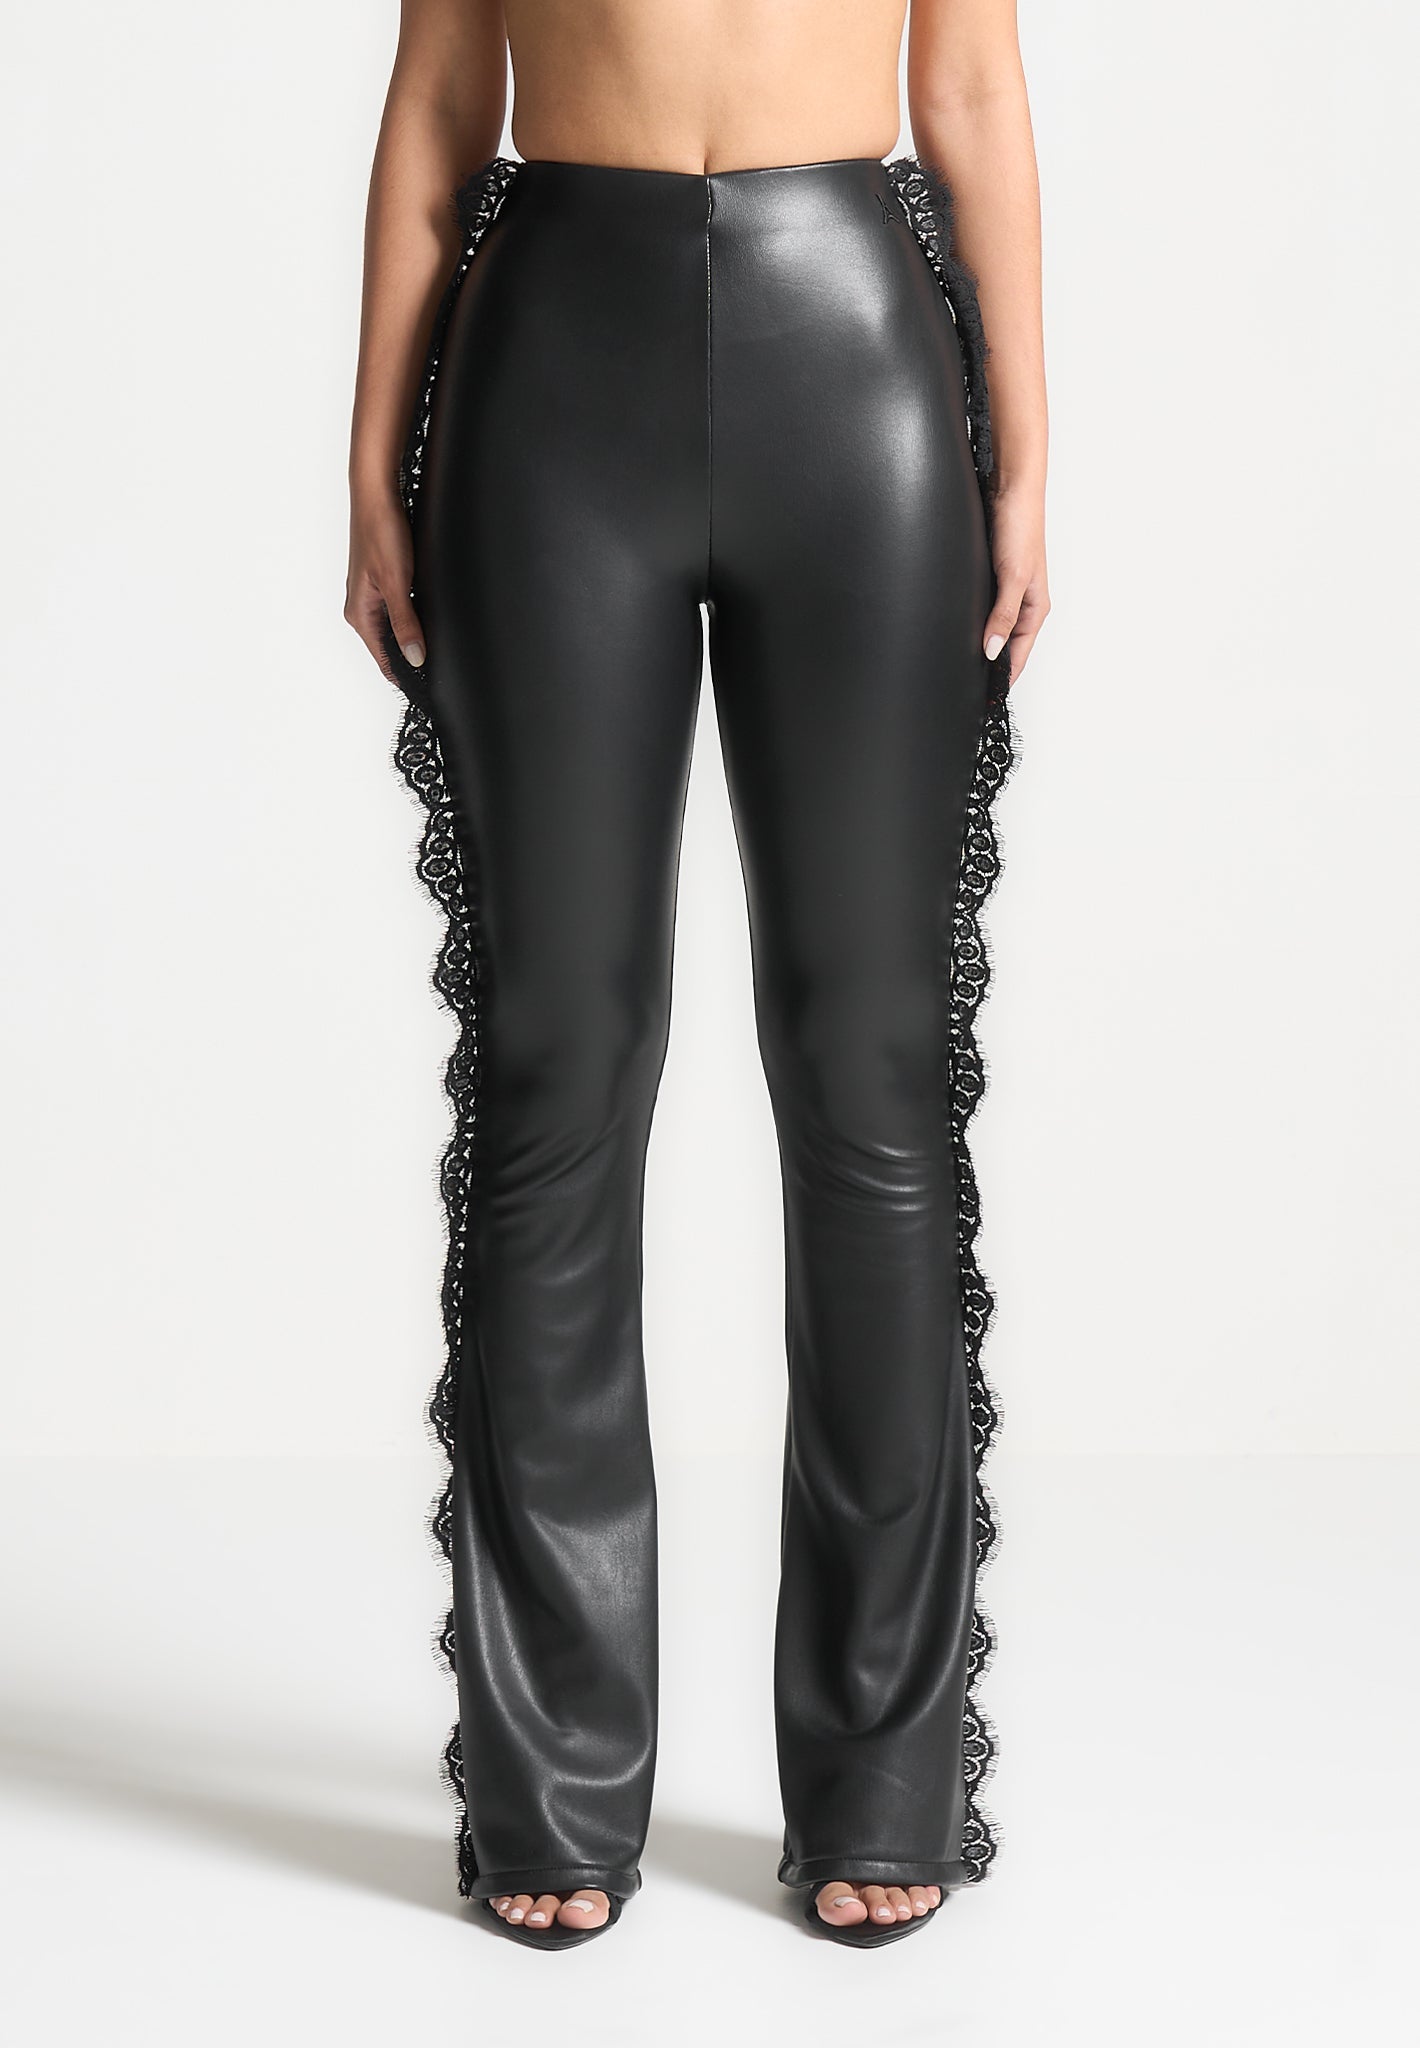 lace-trim-vegan-leather-fit-and-flare-leggings-black